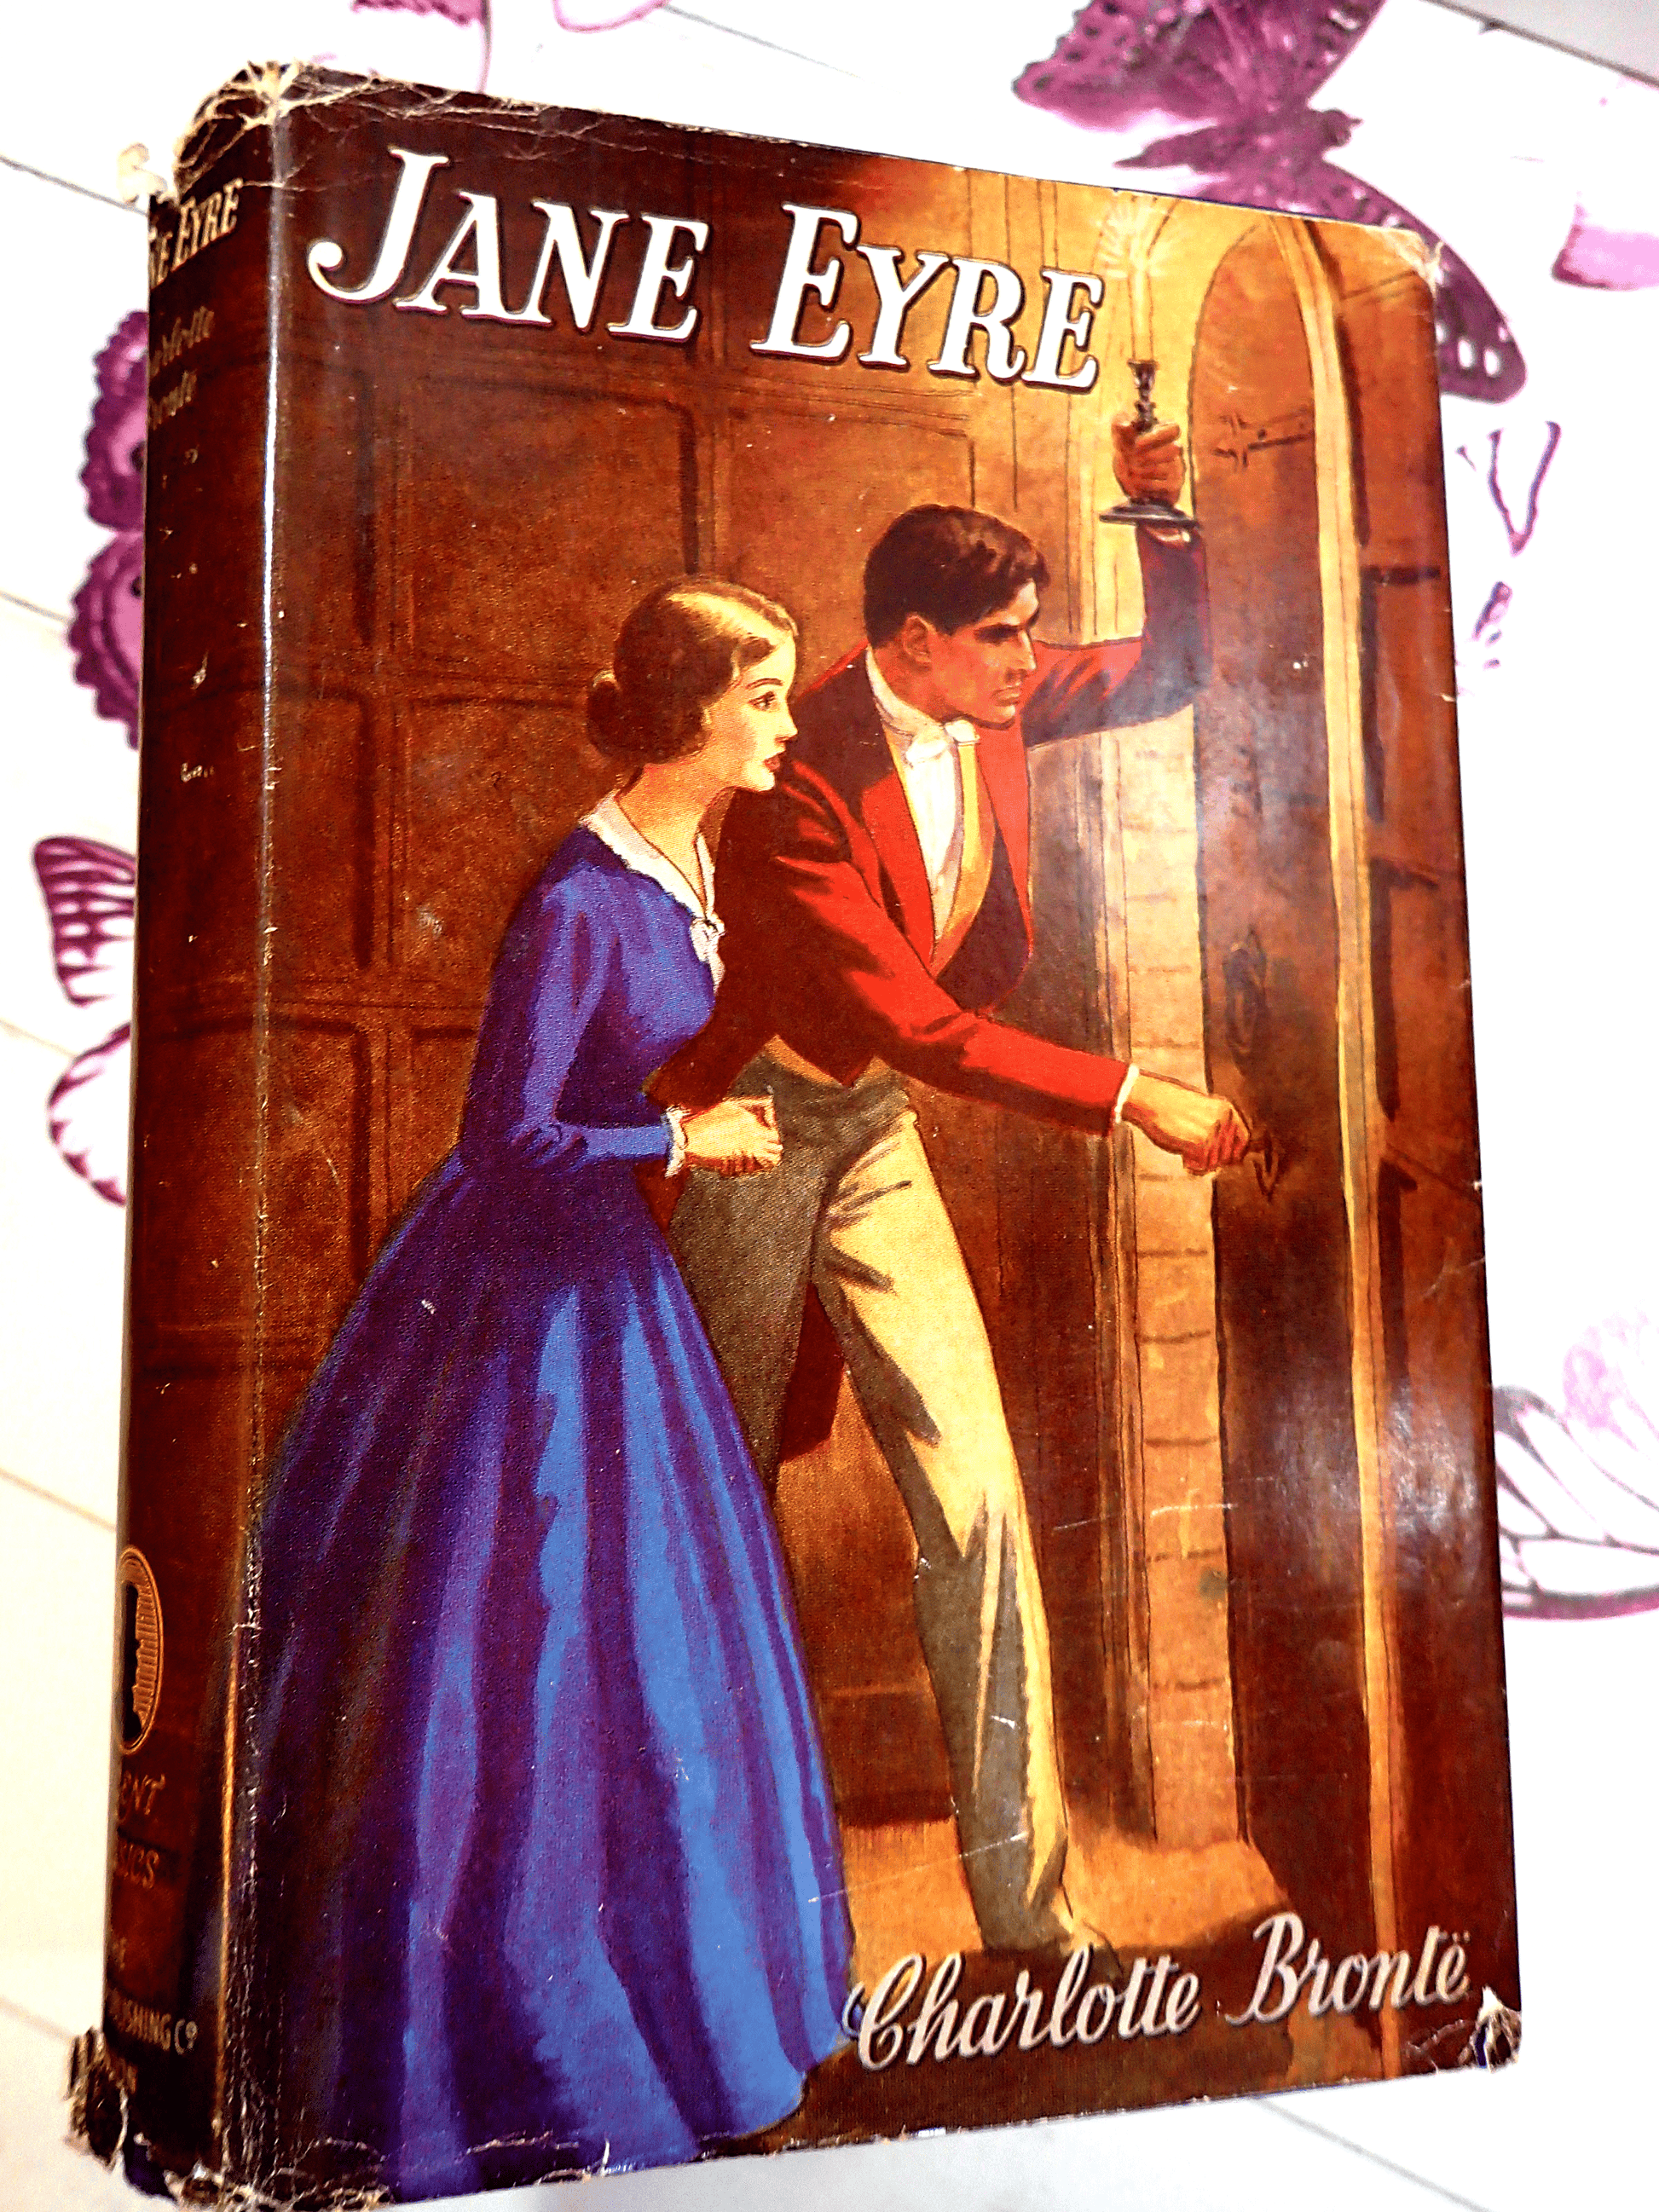 Front cover of Jane Eyre Charlotte Bronte Regent Classics Vintage Hardback Book showing Jane with Mr Rochester